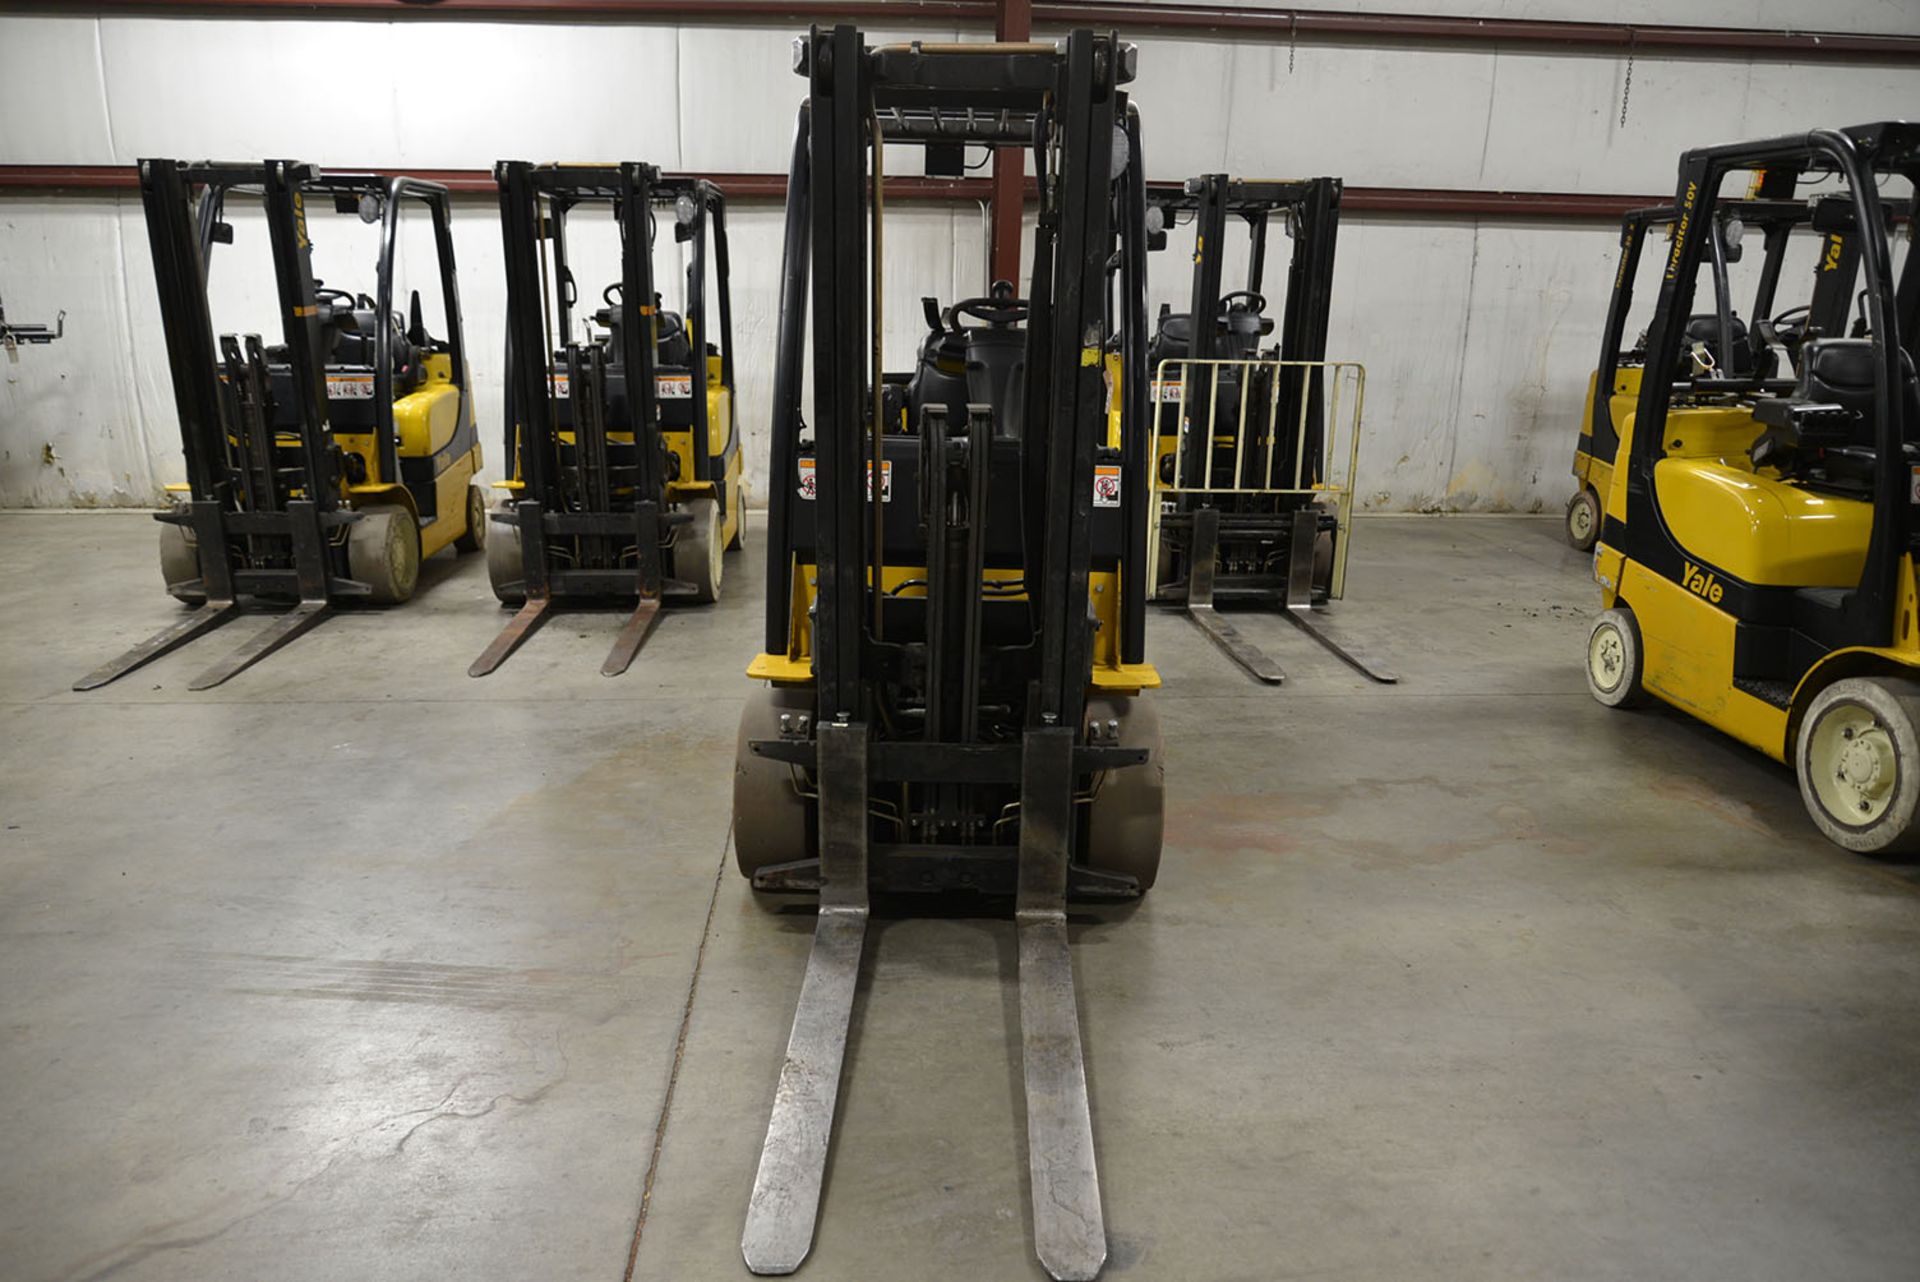 2008 YALE 5,000-lb. Capacity Forklift, Model GLC050VXNV, S/N A910V13921F, LPG, Solid Non-Marking - Image 3 of 6